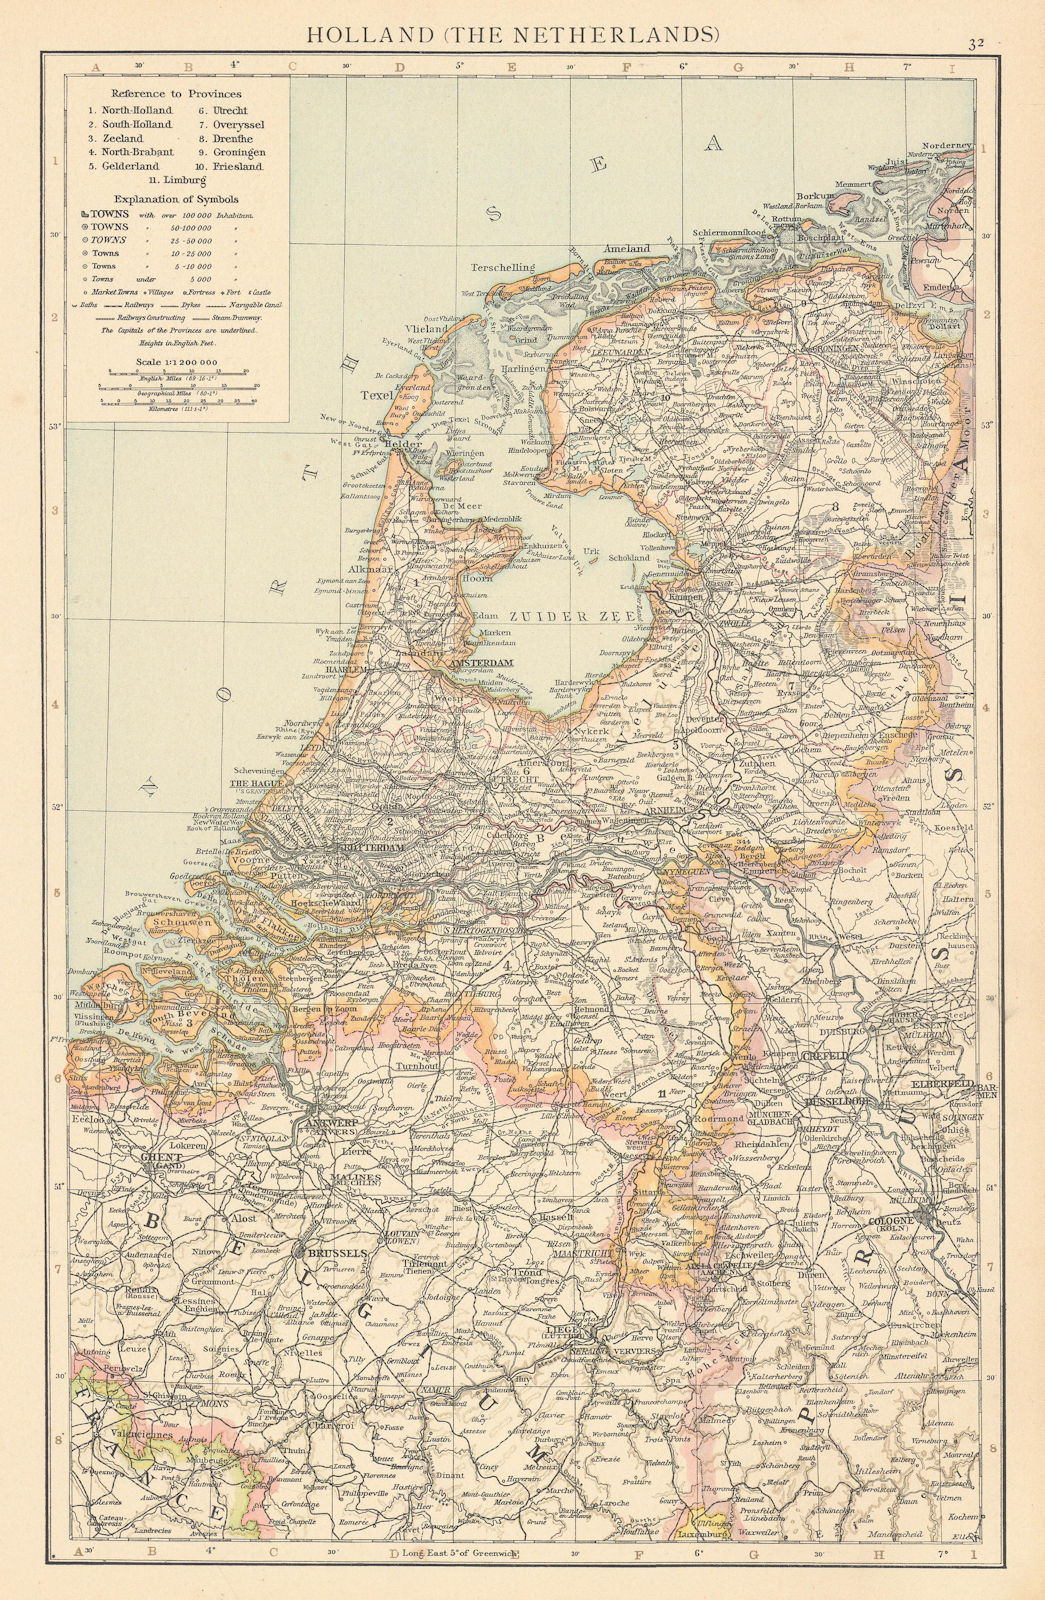 Holland (The Netherlands). Dykes Canals Railways. THE TIMES 1895 old map